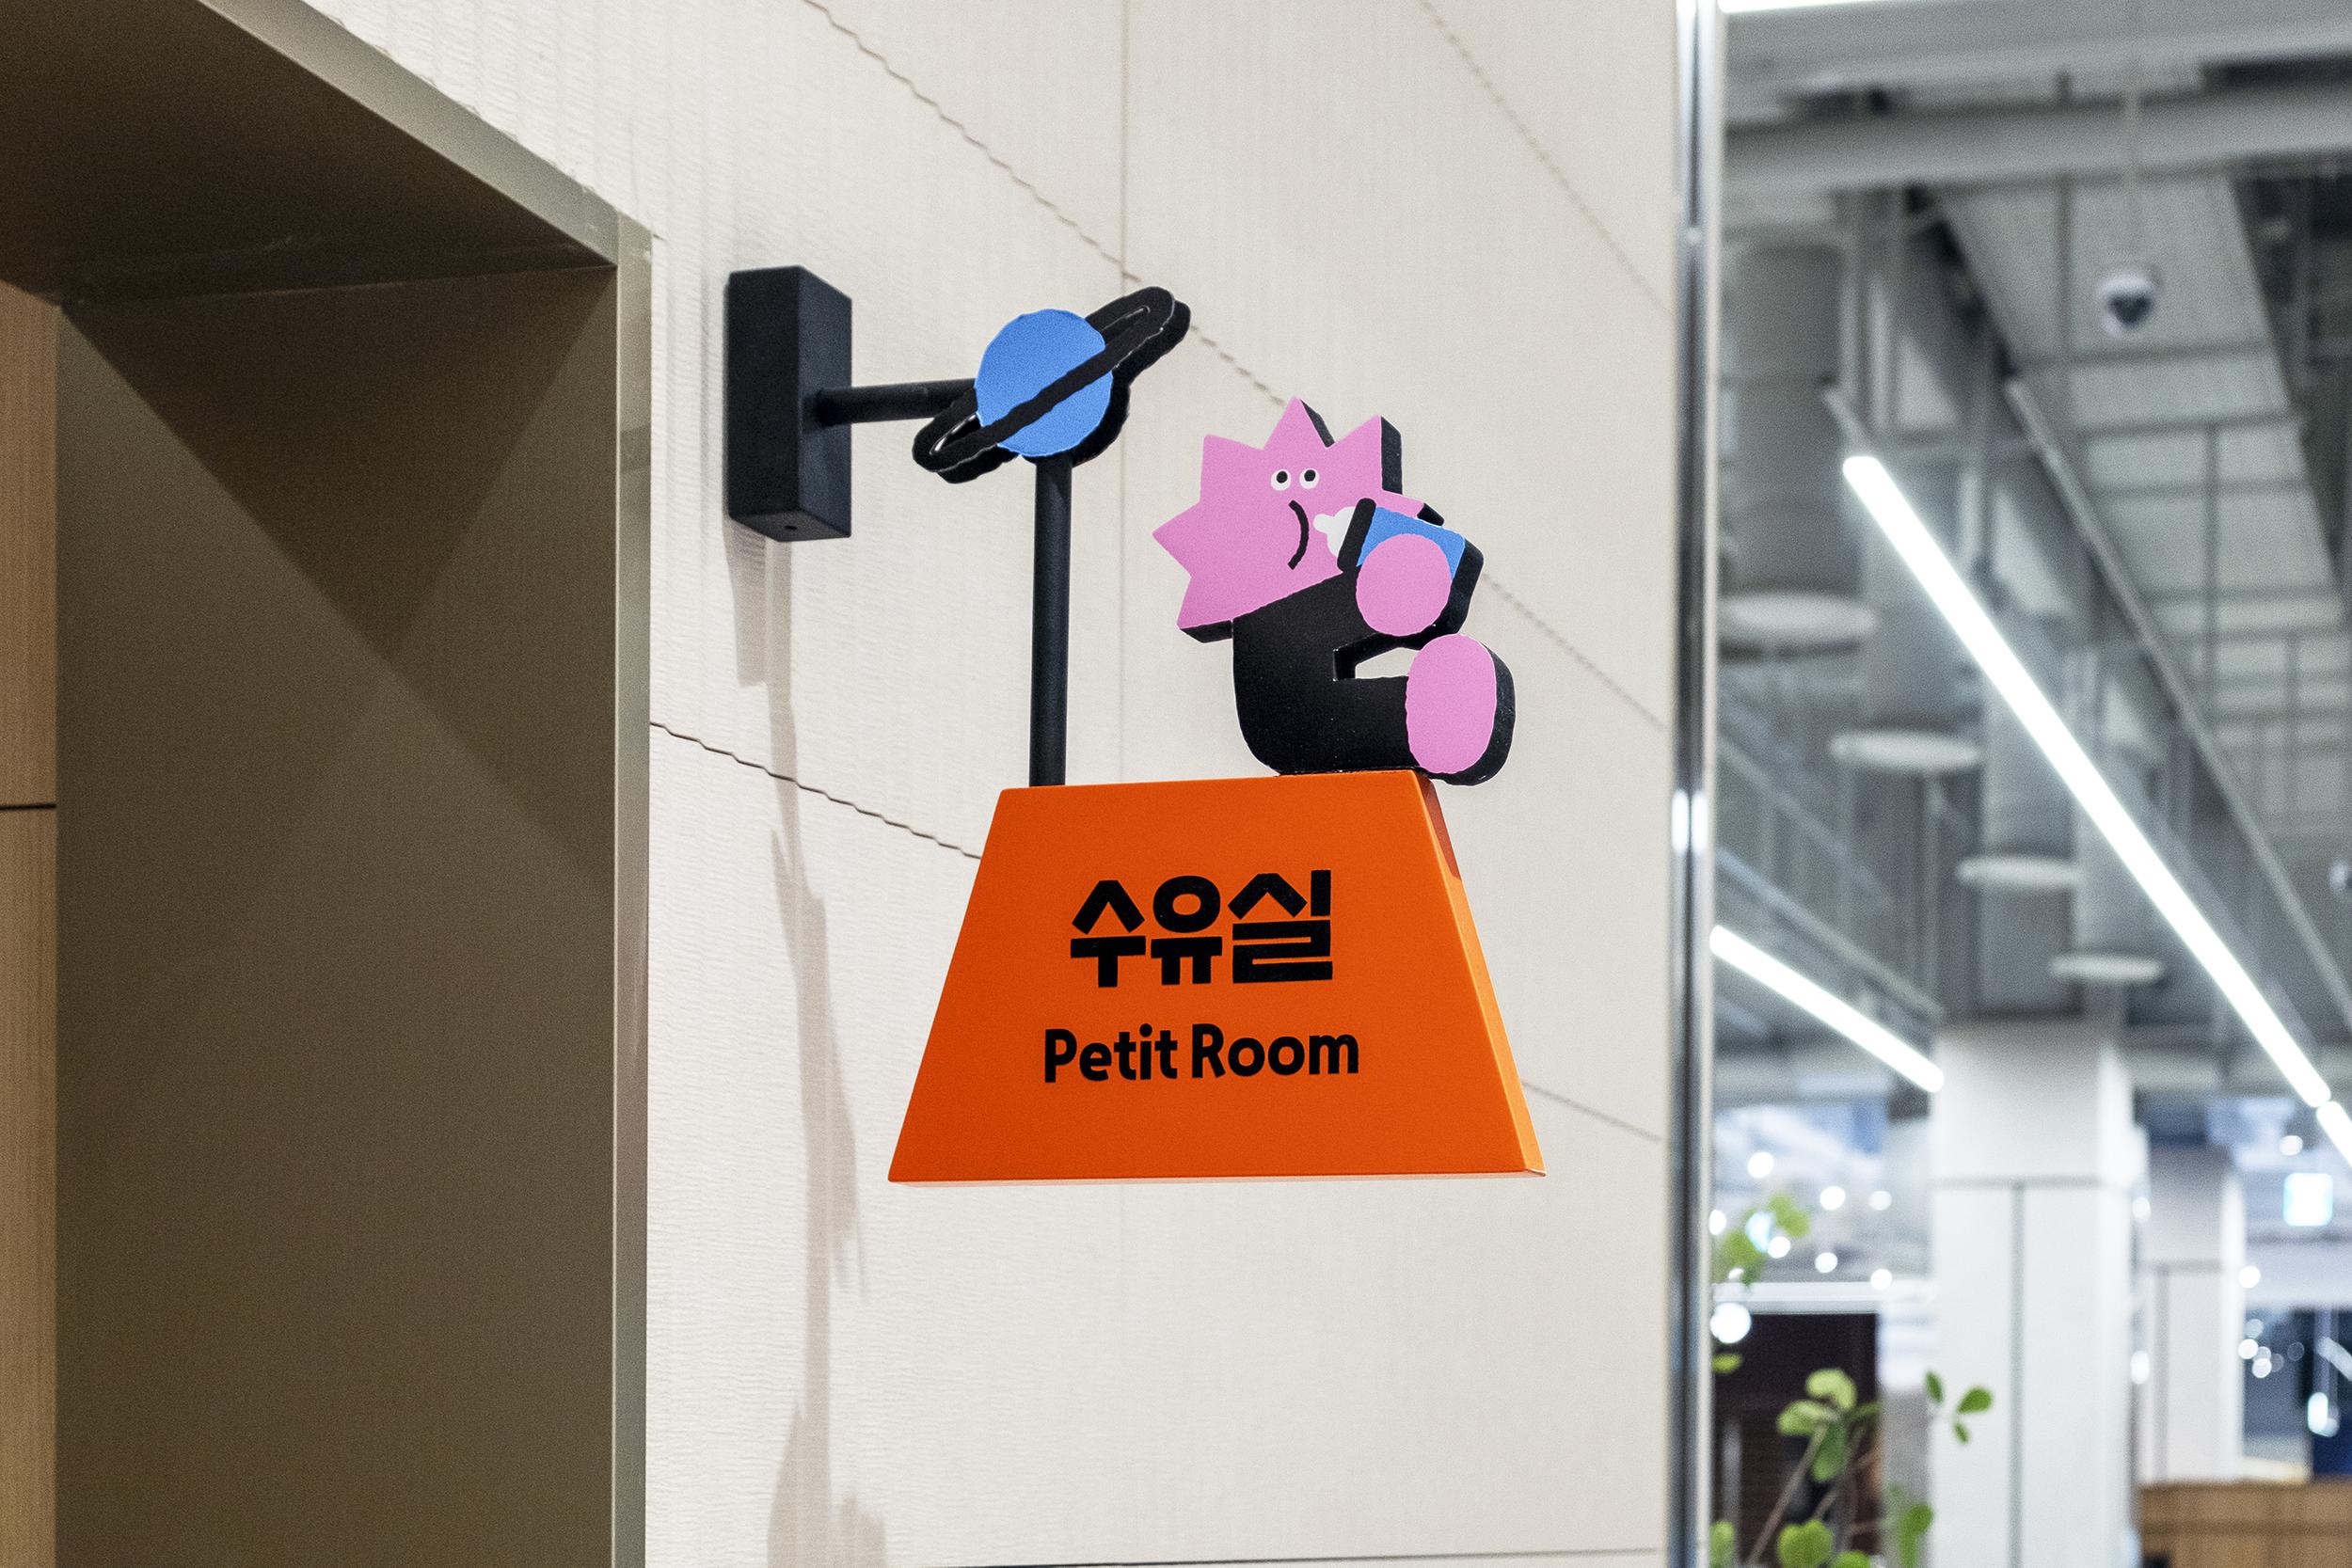 Brand identity, interior design and signage for toy department Petit Planet at South Korean department store Hyundai. Designed by Studio fnt.